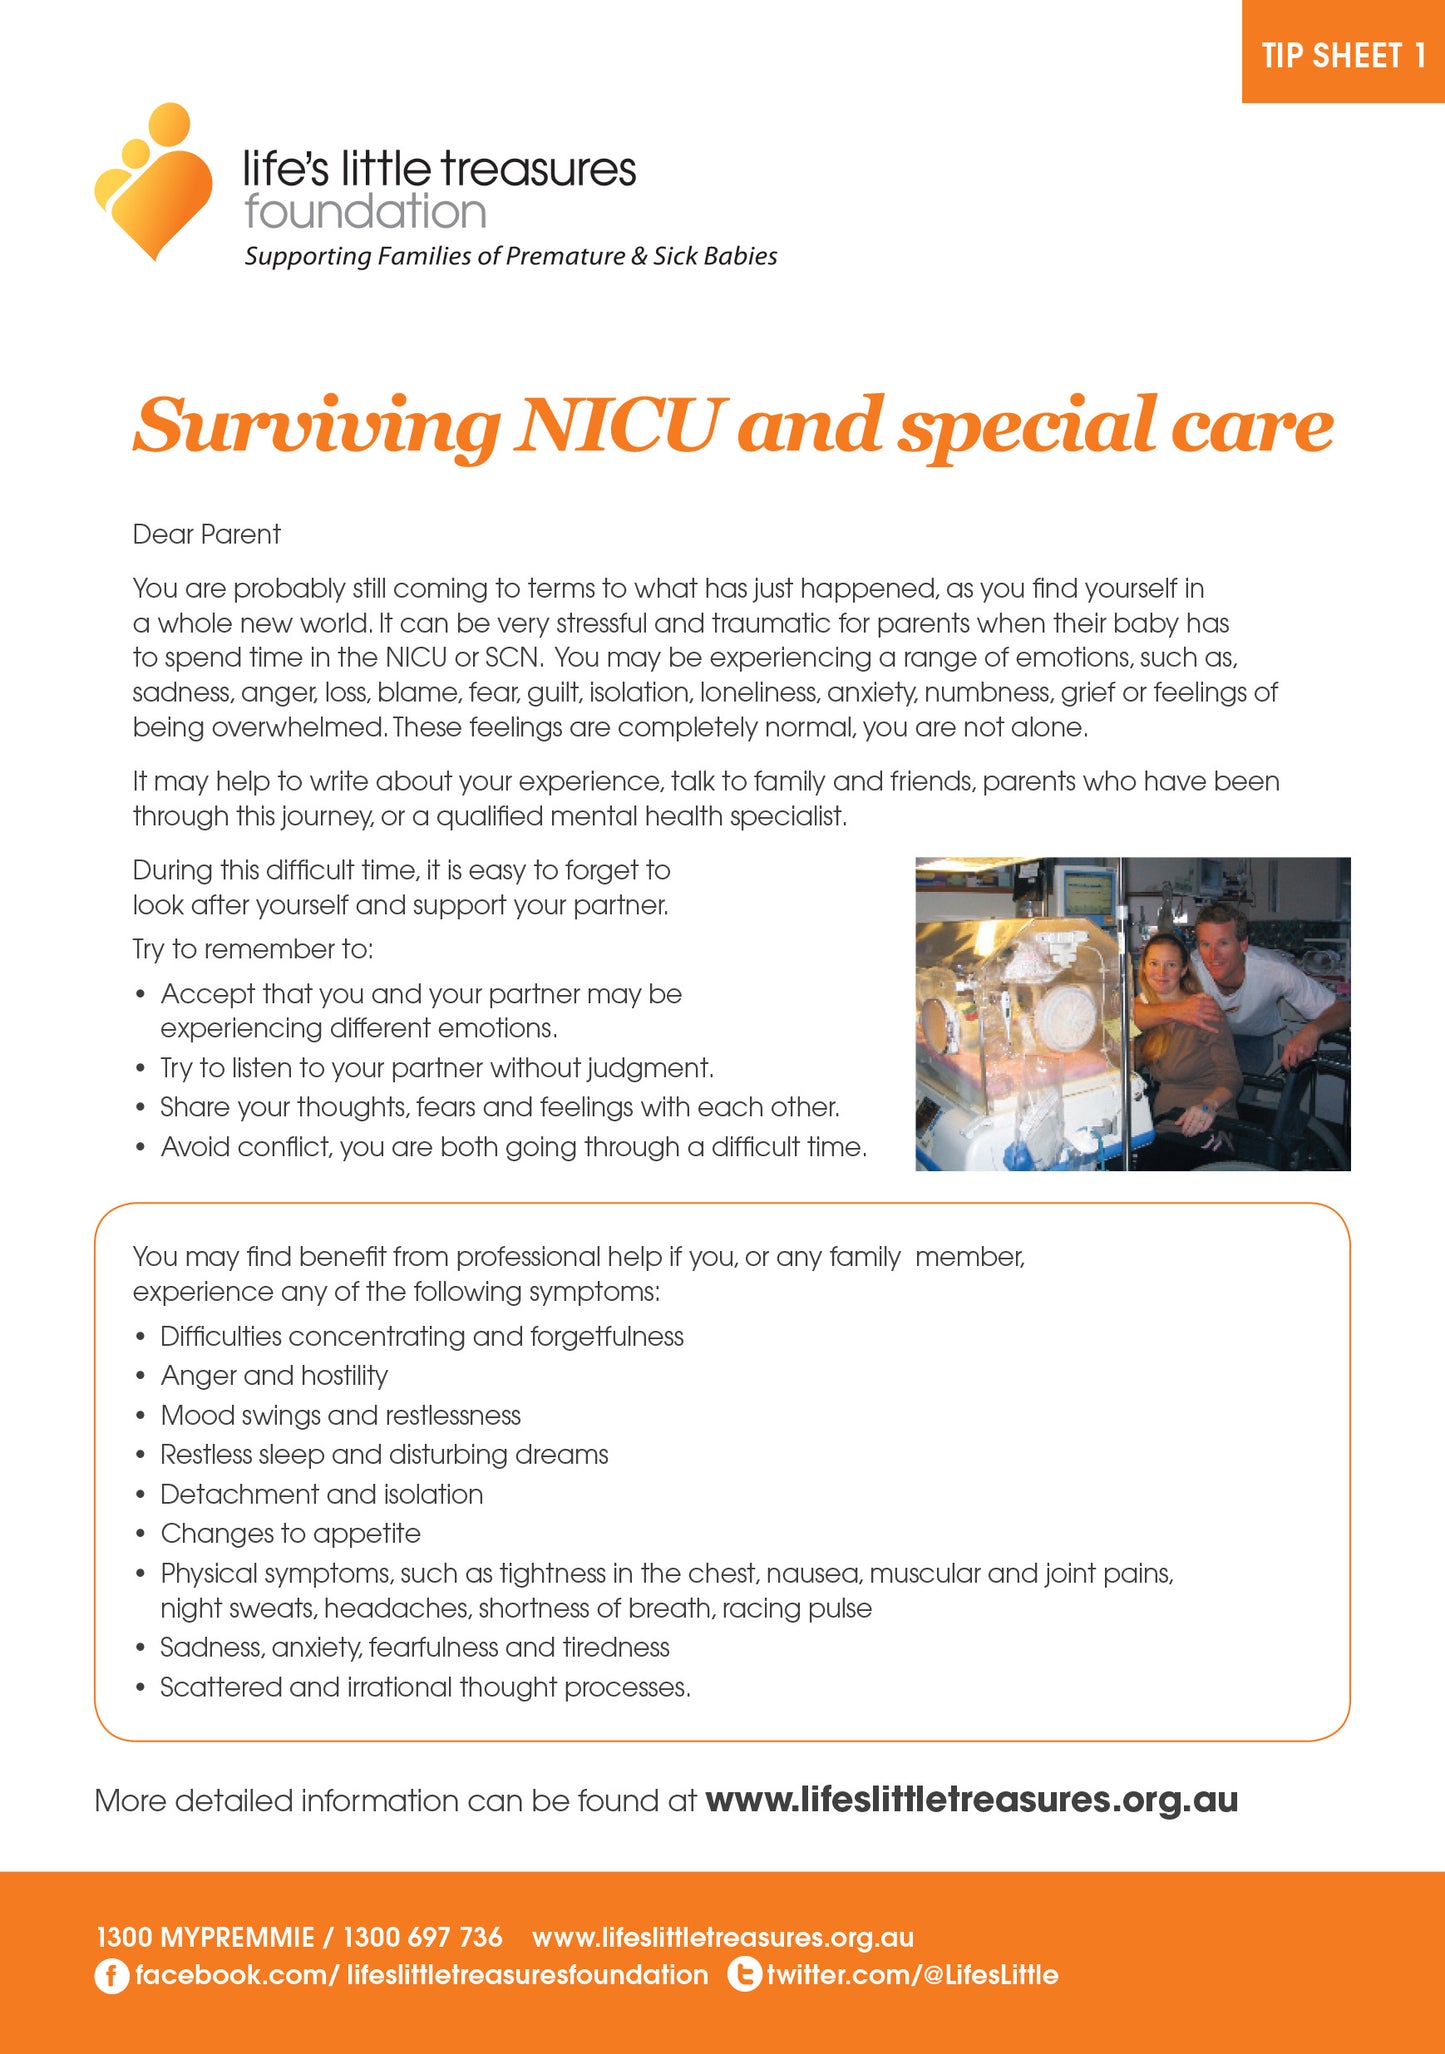 Tip Sheet 1 - Surviving NICU and Special Care